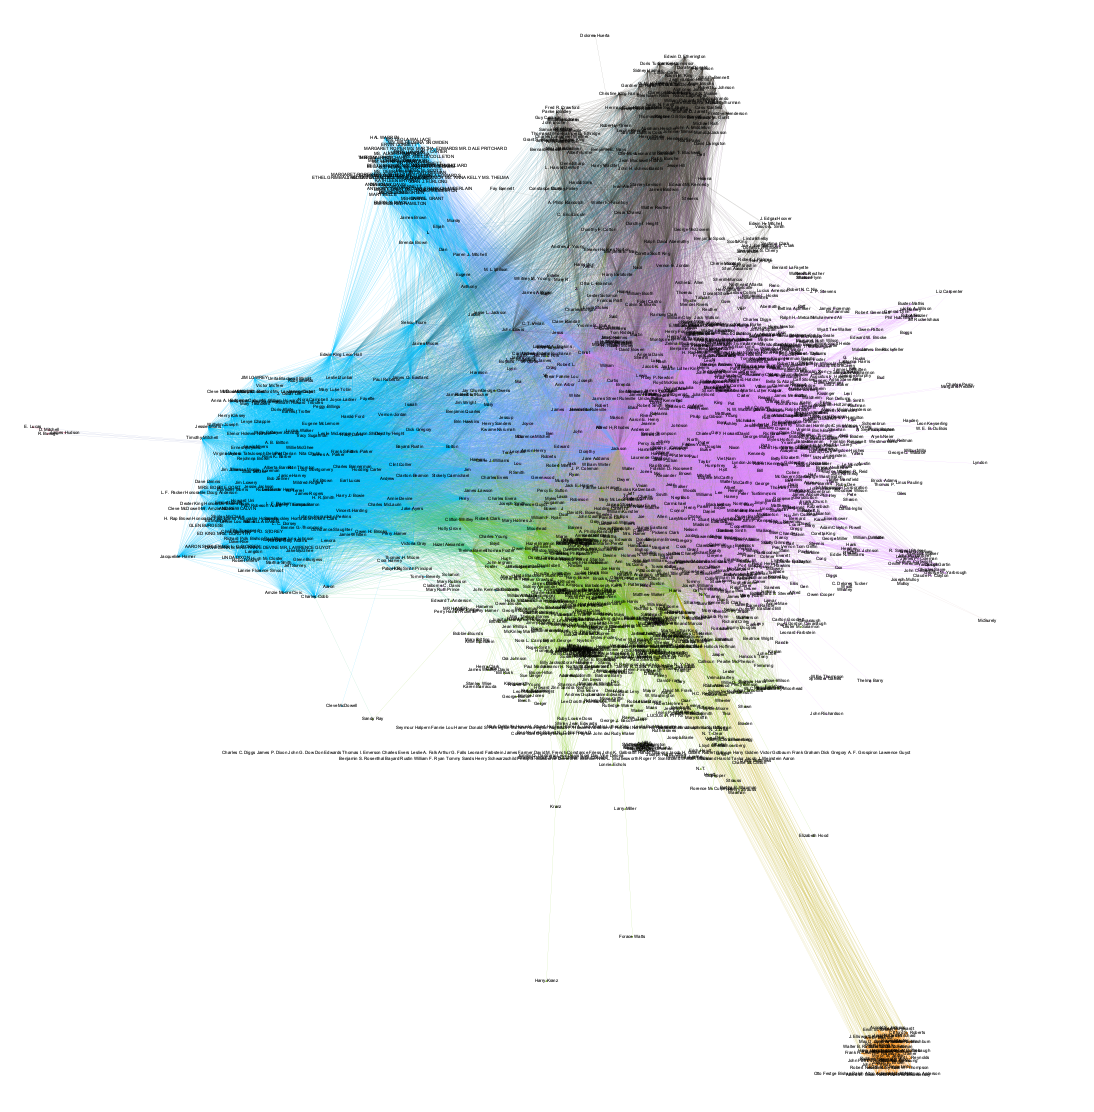 full network graph of named entities